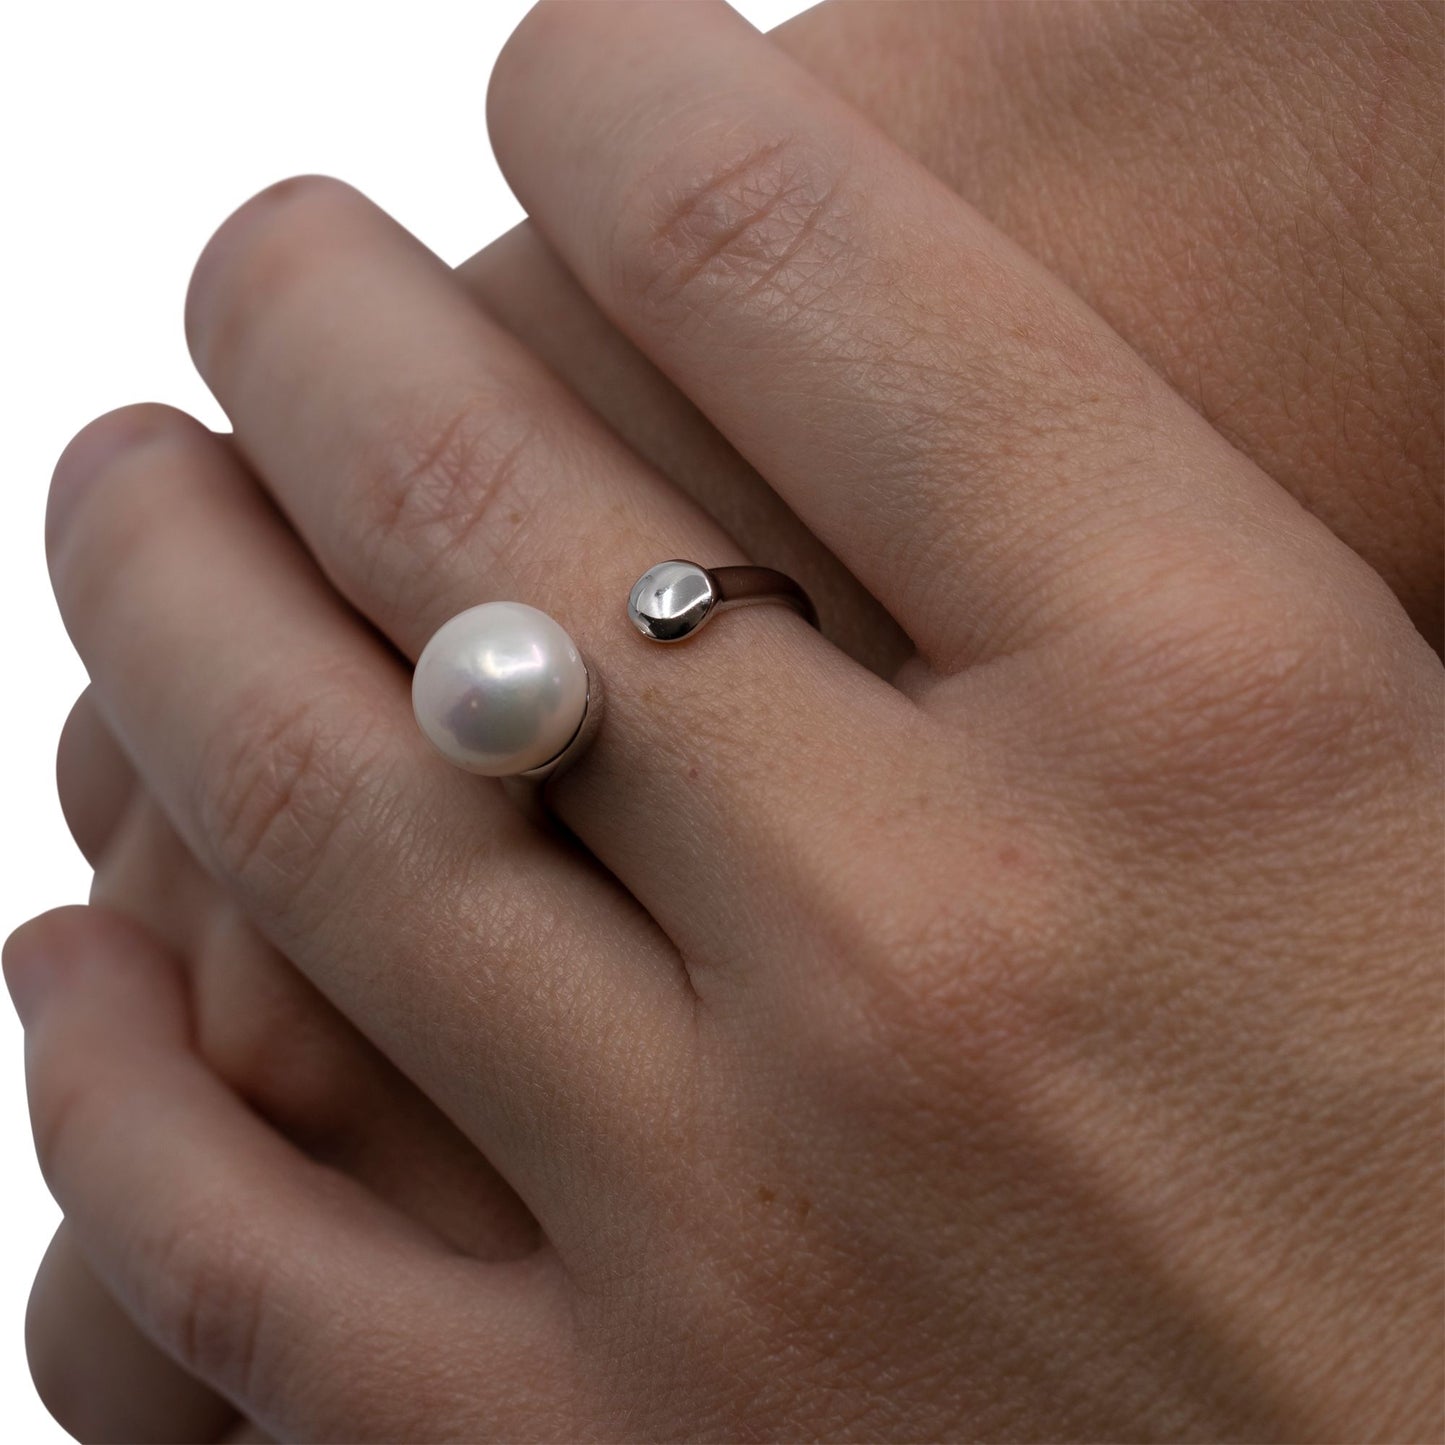 Lala - Silver-Tone Freshwater Pearl Adjustable Ring